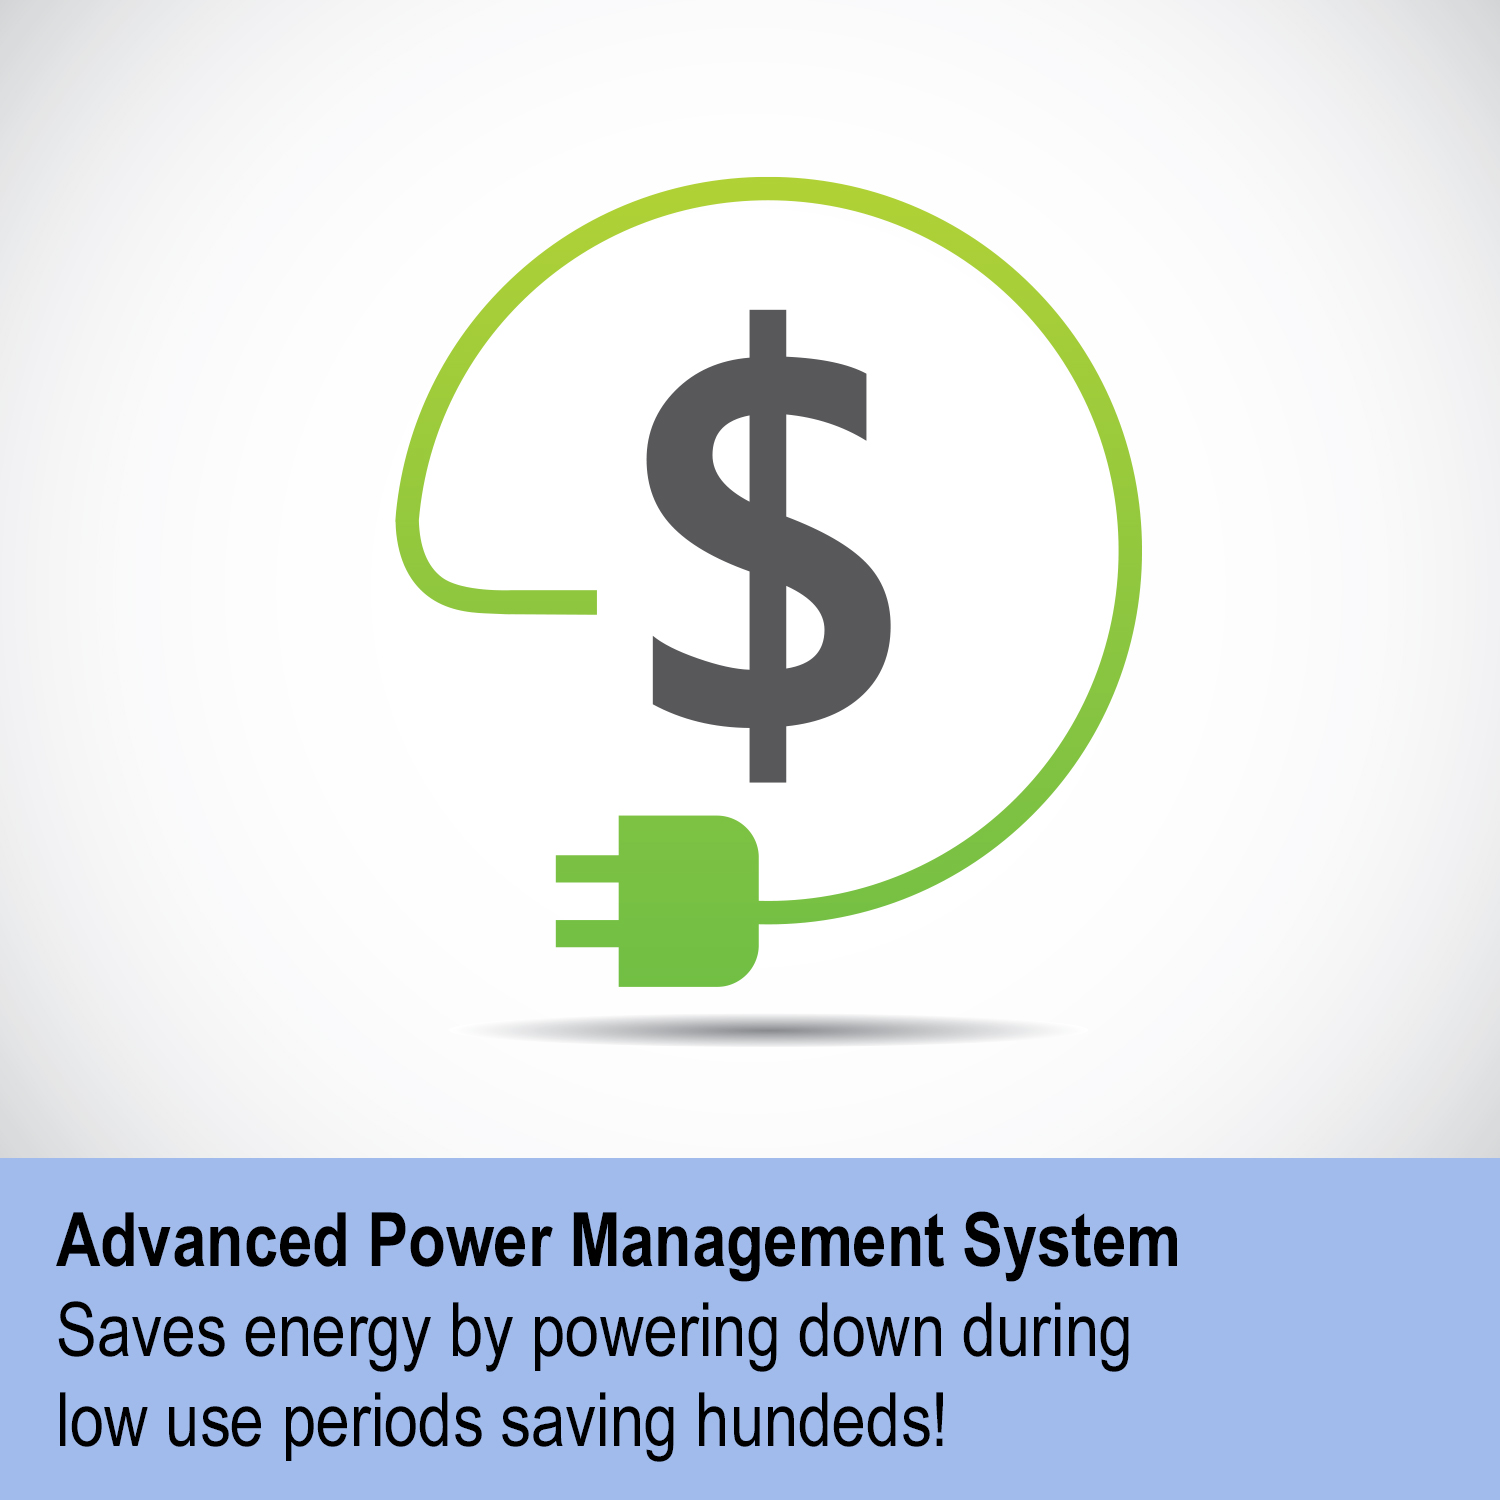 The Advanced Power Management System saves energy by powering down during low use periods and saving you hundreds.